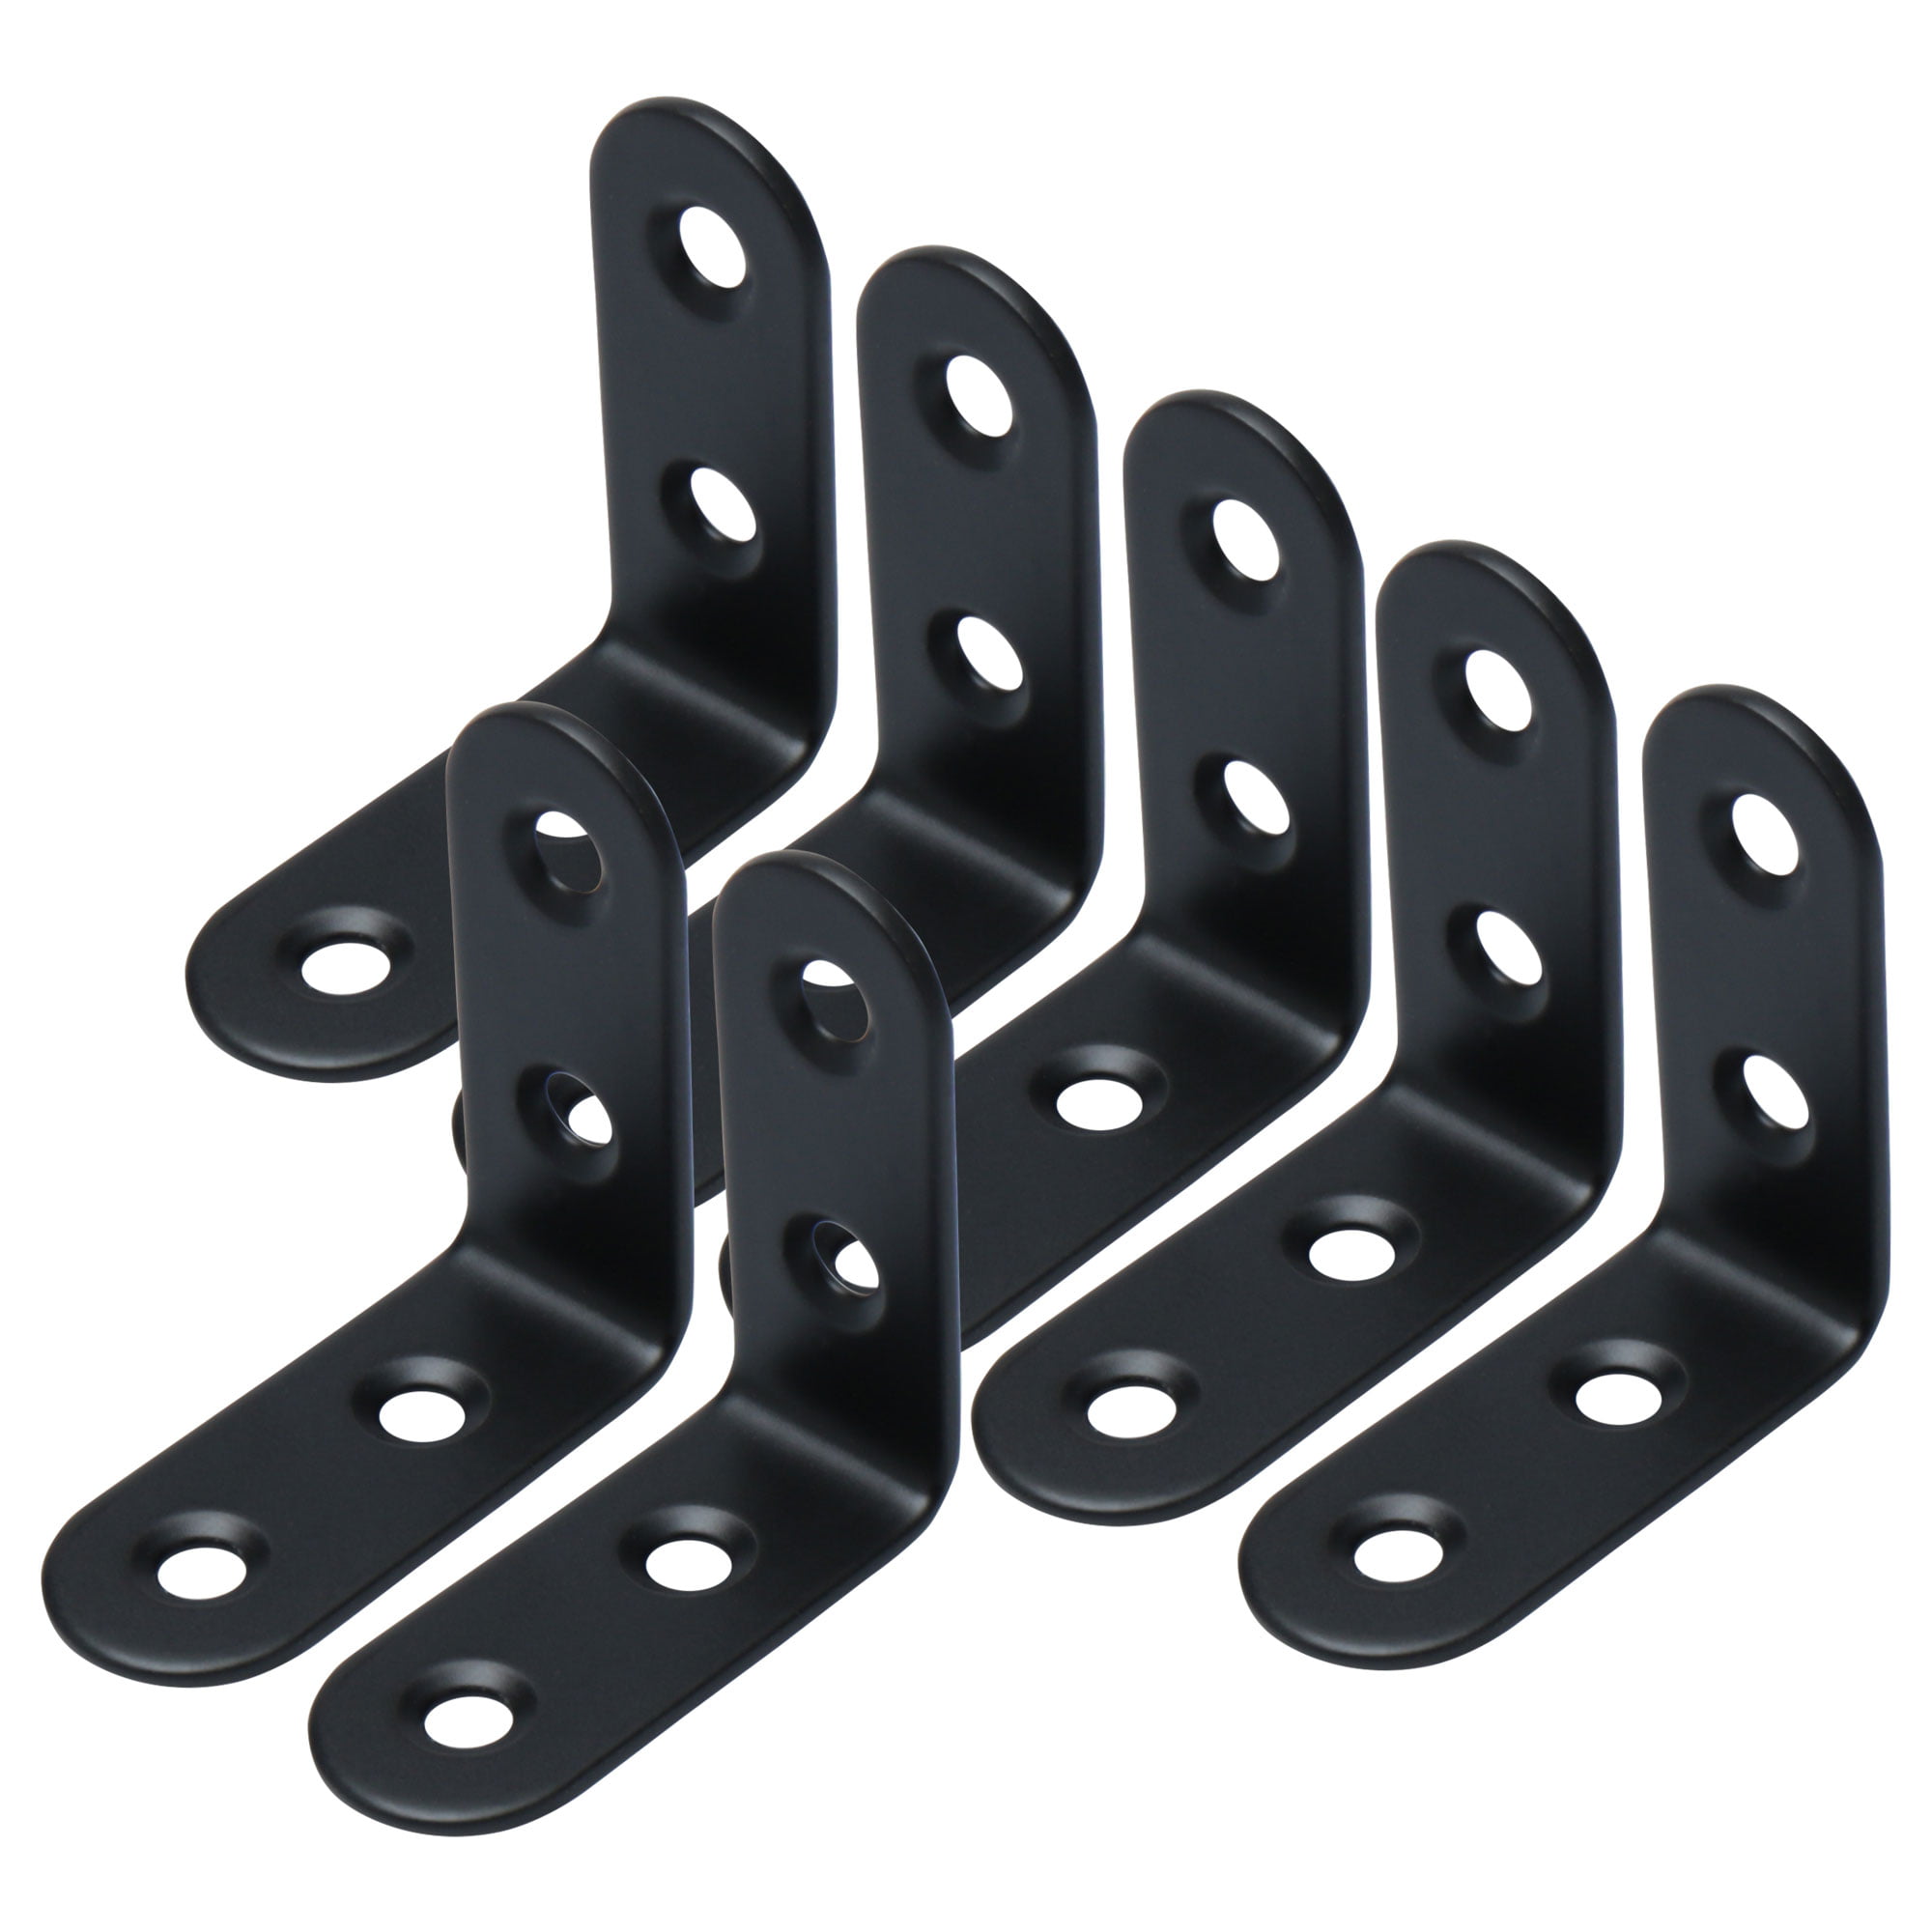 uxcell 24pcs Angle Bracket Stainless Steel 25x25mm Black Corner Brace Fastener L Shaped Right Angle Bracket Corner Protector with Screws for Furniture 